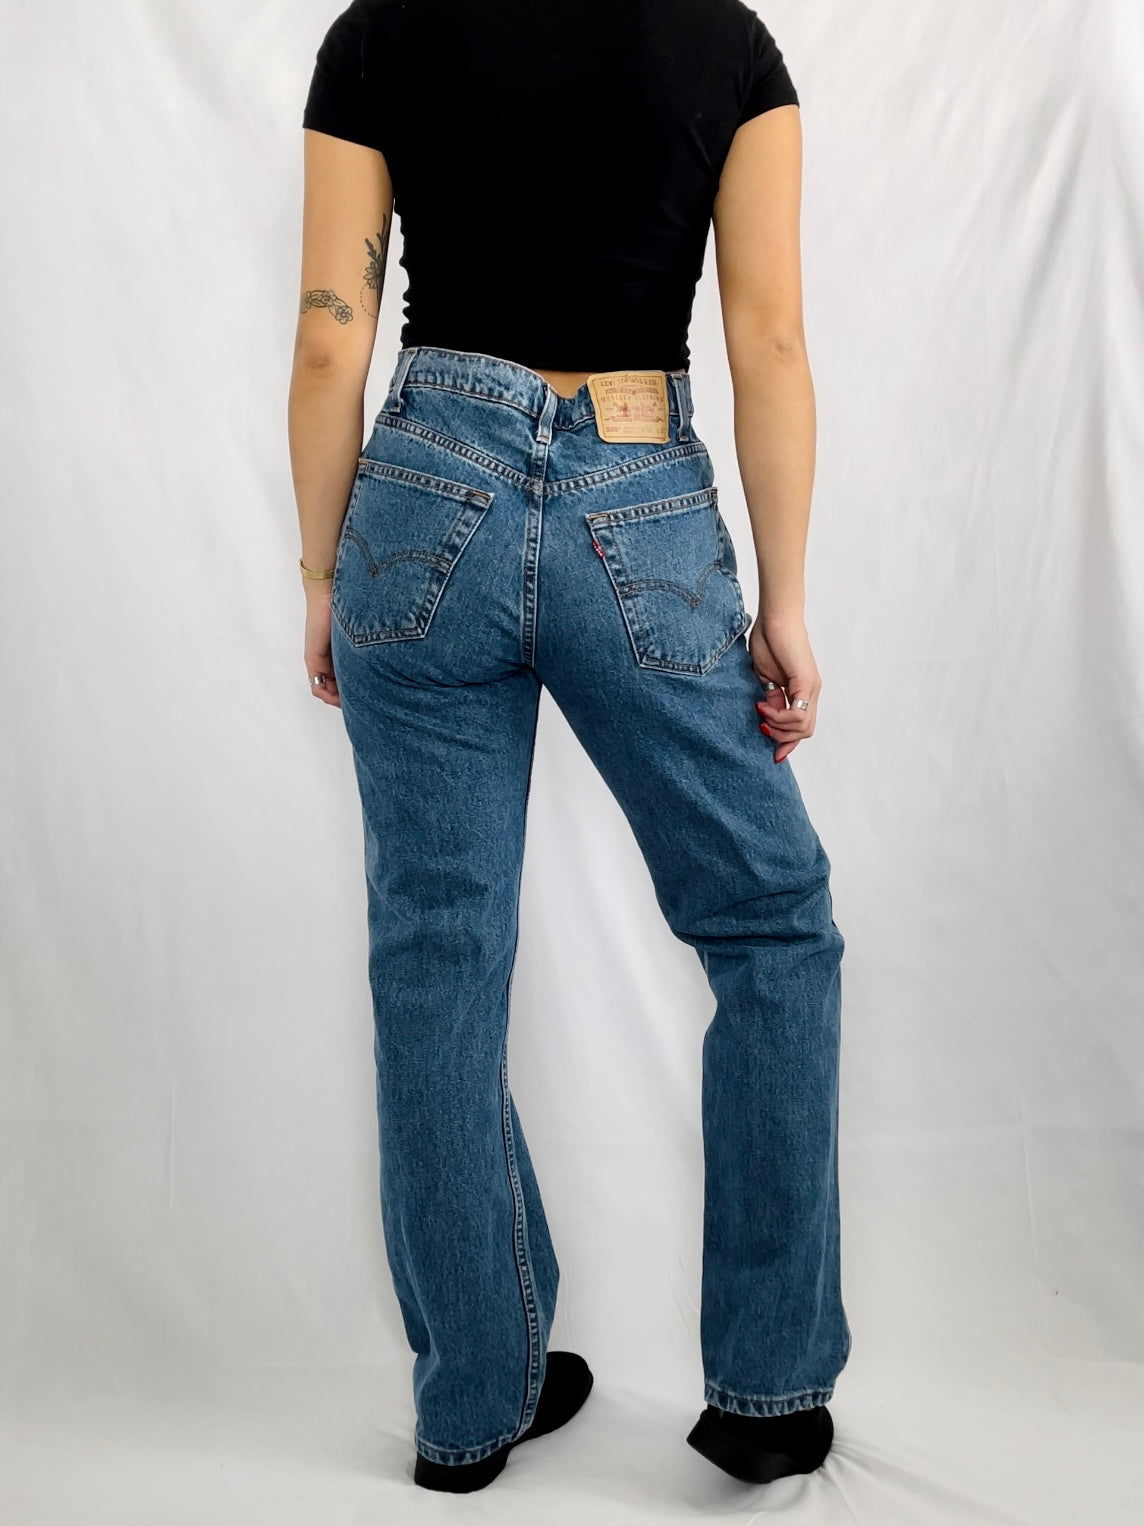 MENS 90s Levi's 505 Jeans (31x31") – Heck Yes